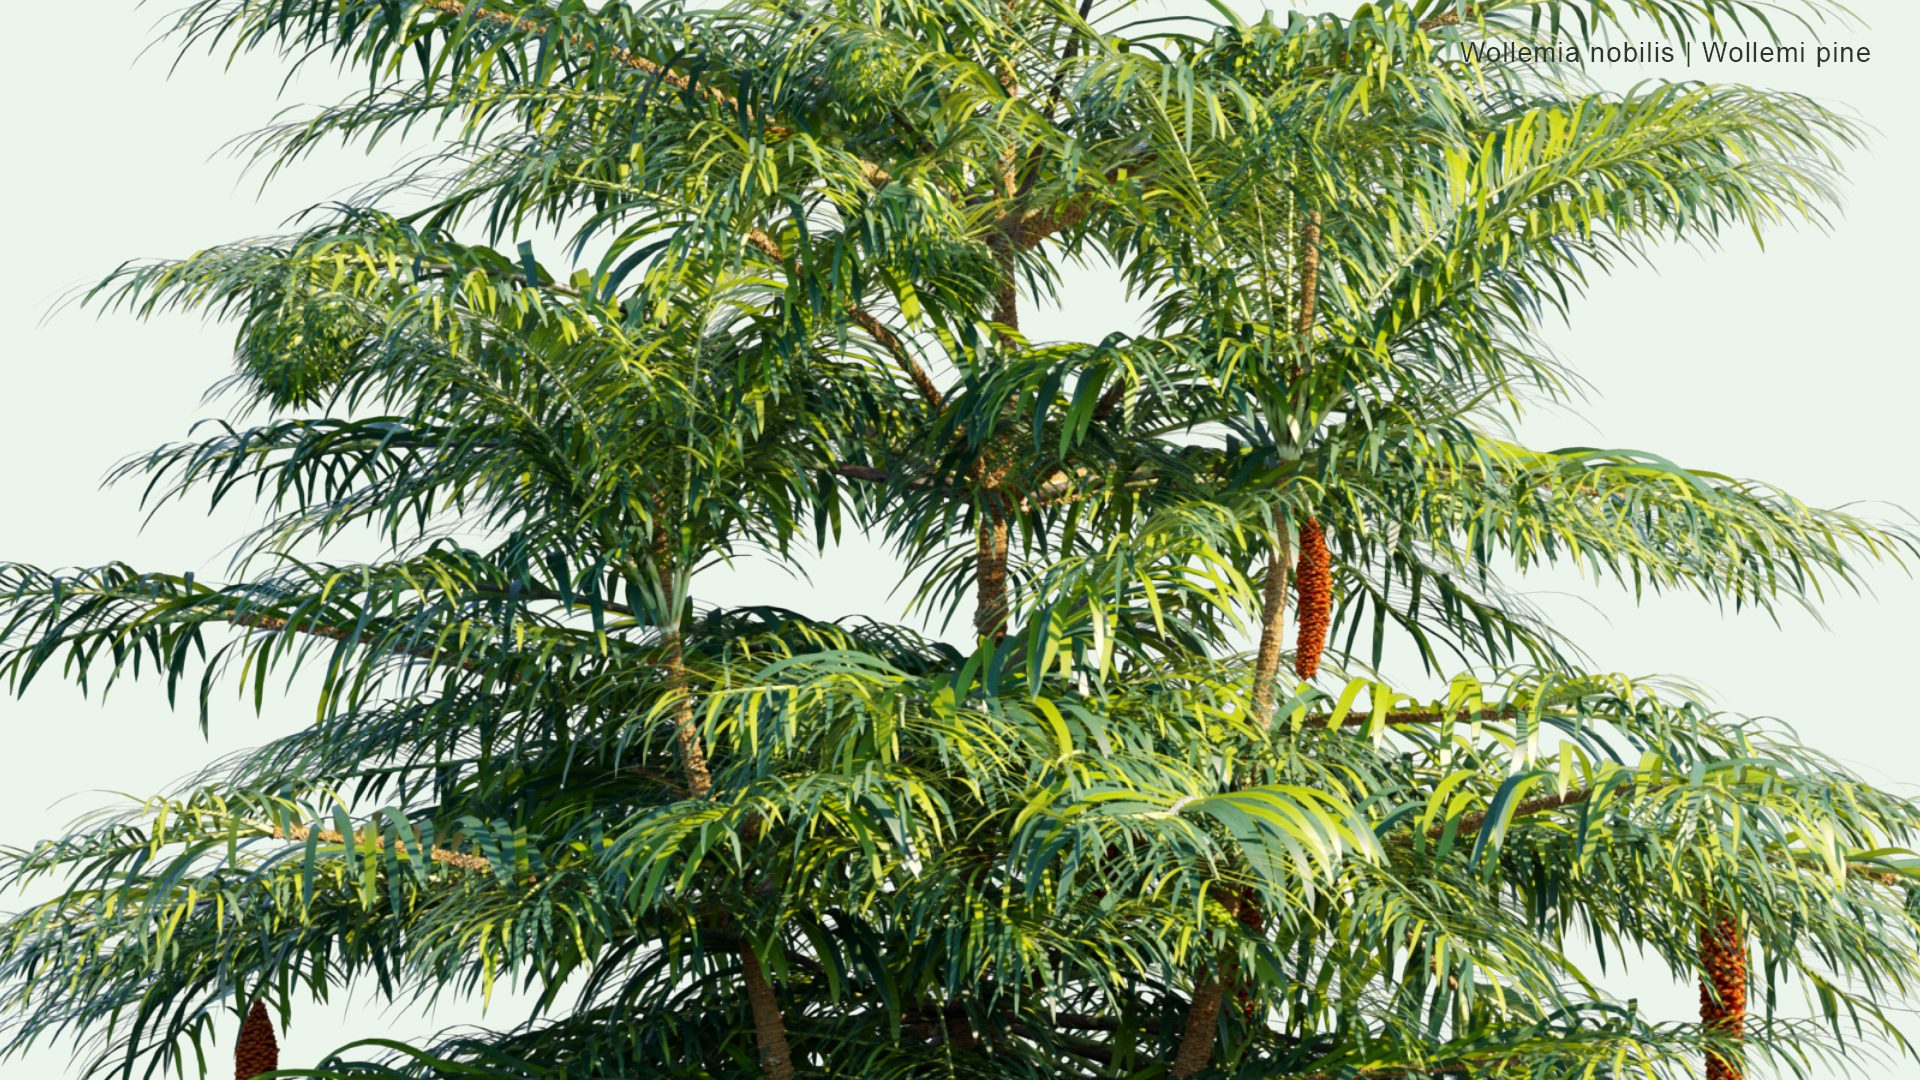 2D Wollemia Nobilis - Wollemi Pine